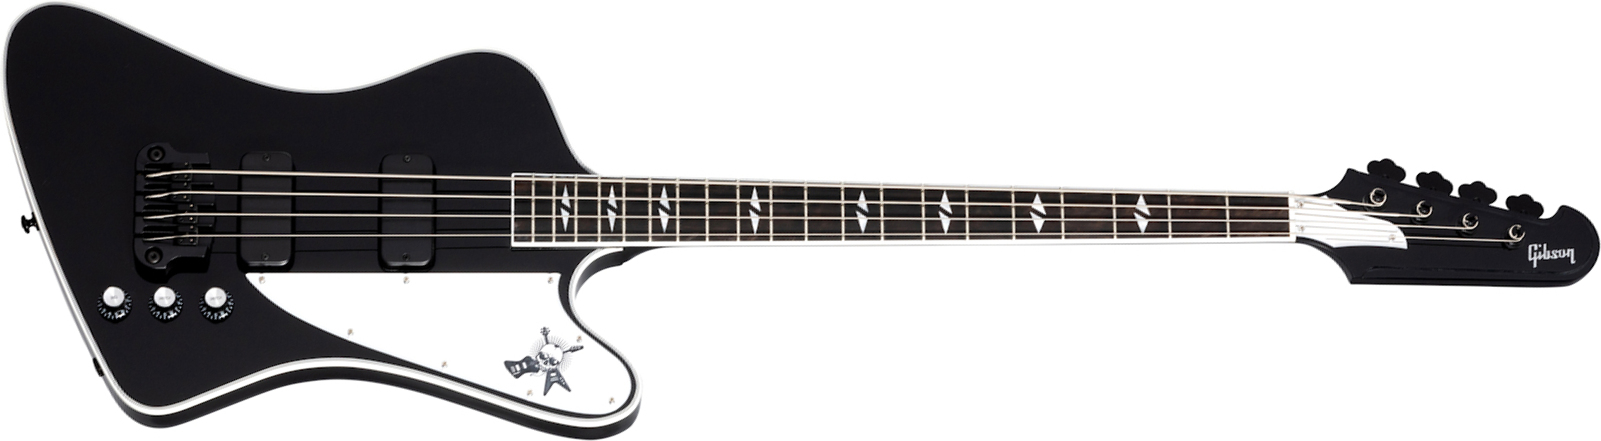 Gibson Gene Simmons Thunderbird G2 Signature Eb - Ebony - Solid body electric bass - Main picture